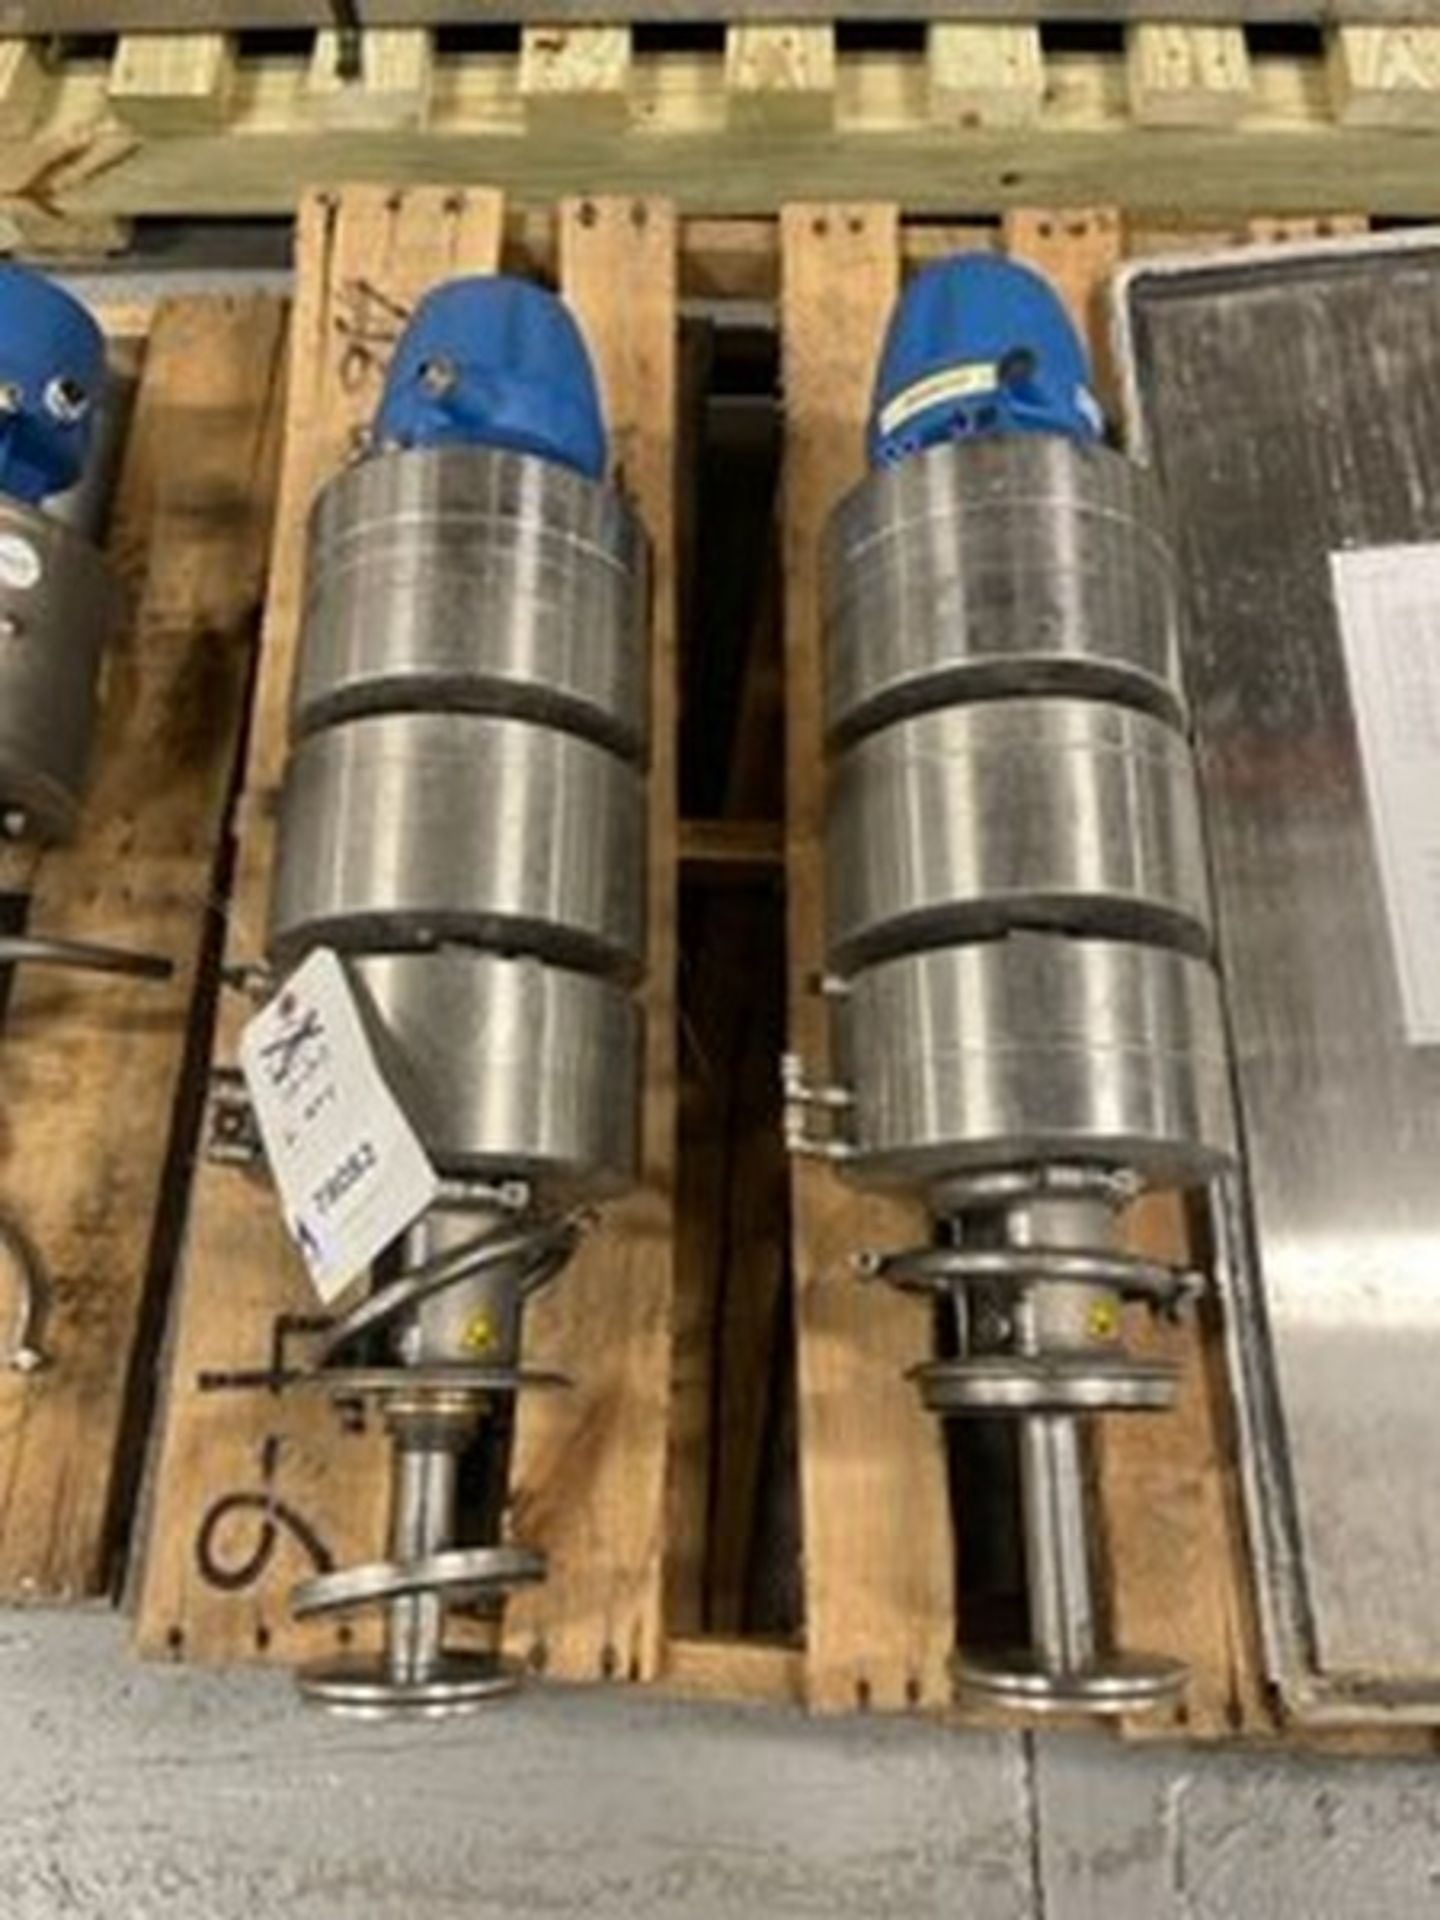 (2) GEA Assorted Aprox. 6" S/S Air ValvesActuators with Think Tops (NOTE: Bodies Not Included;